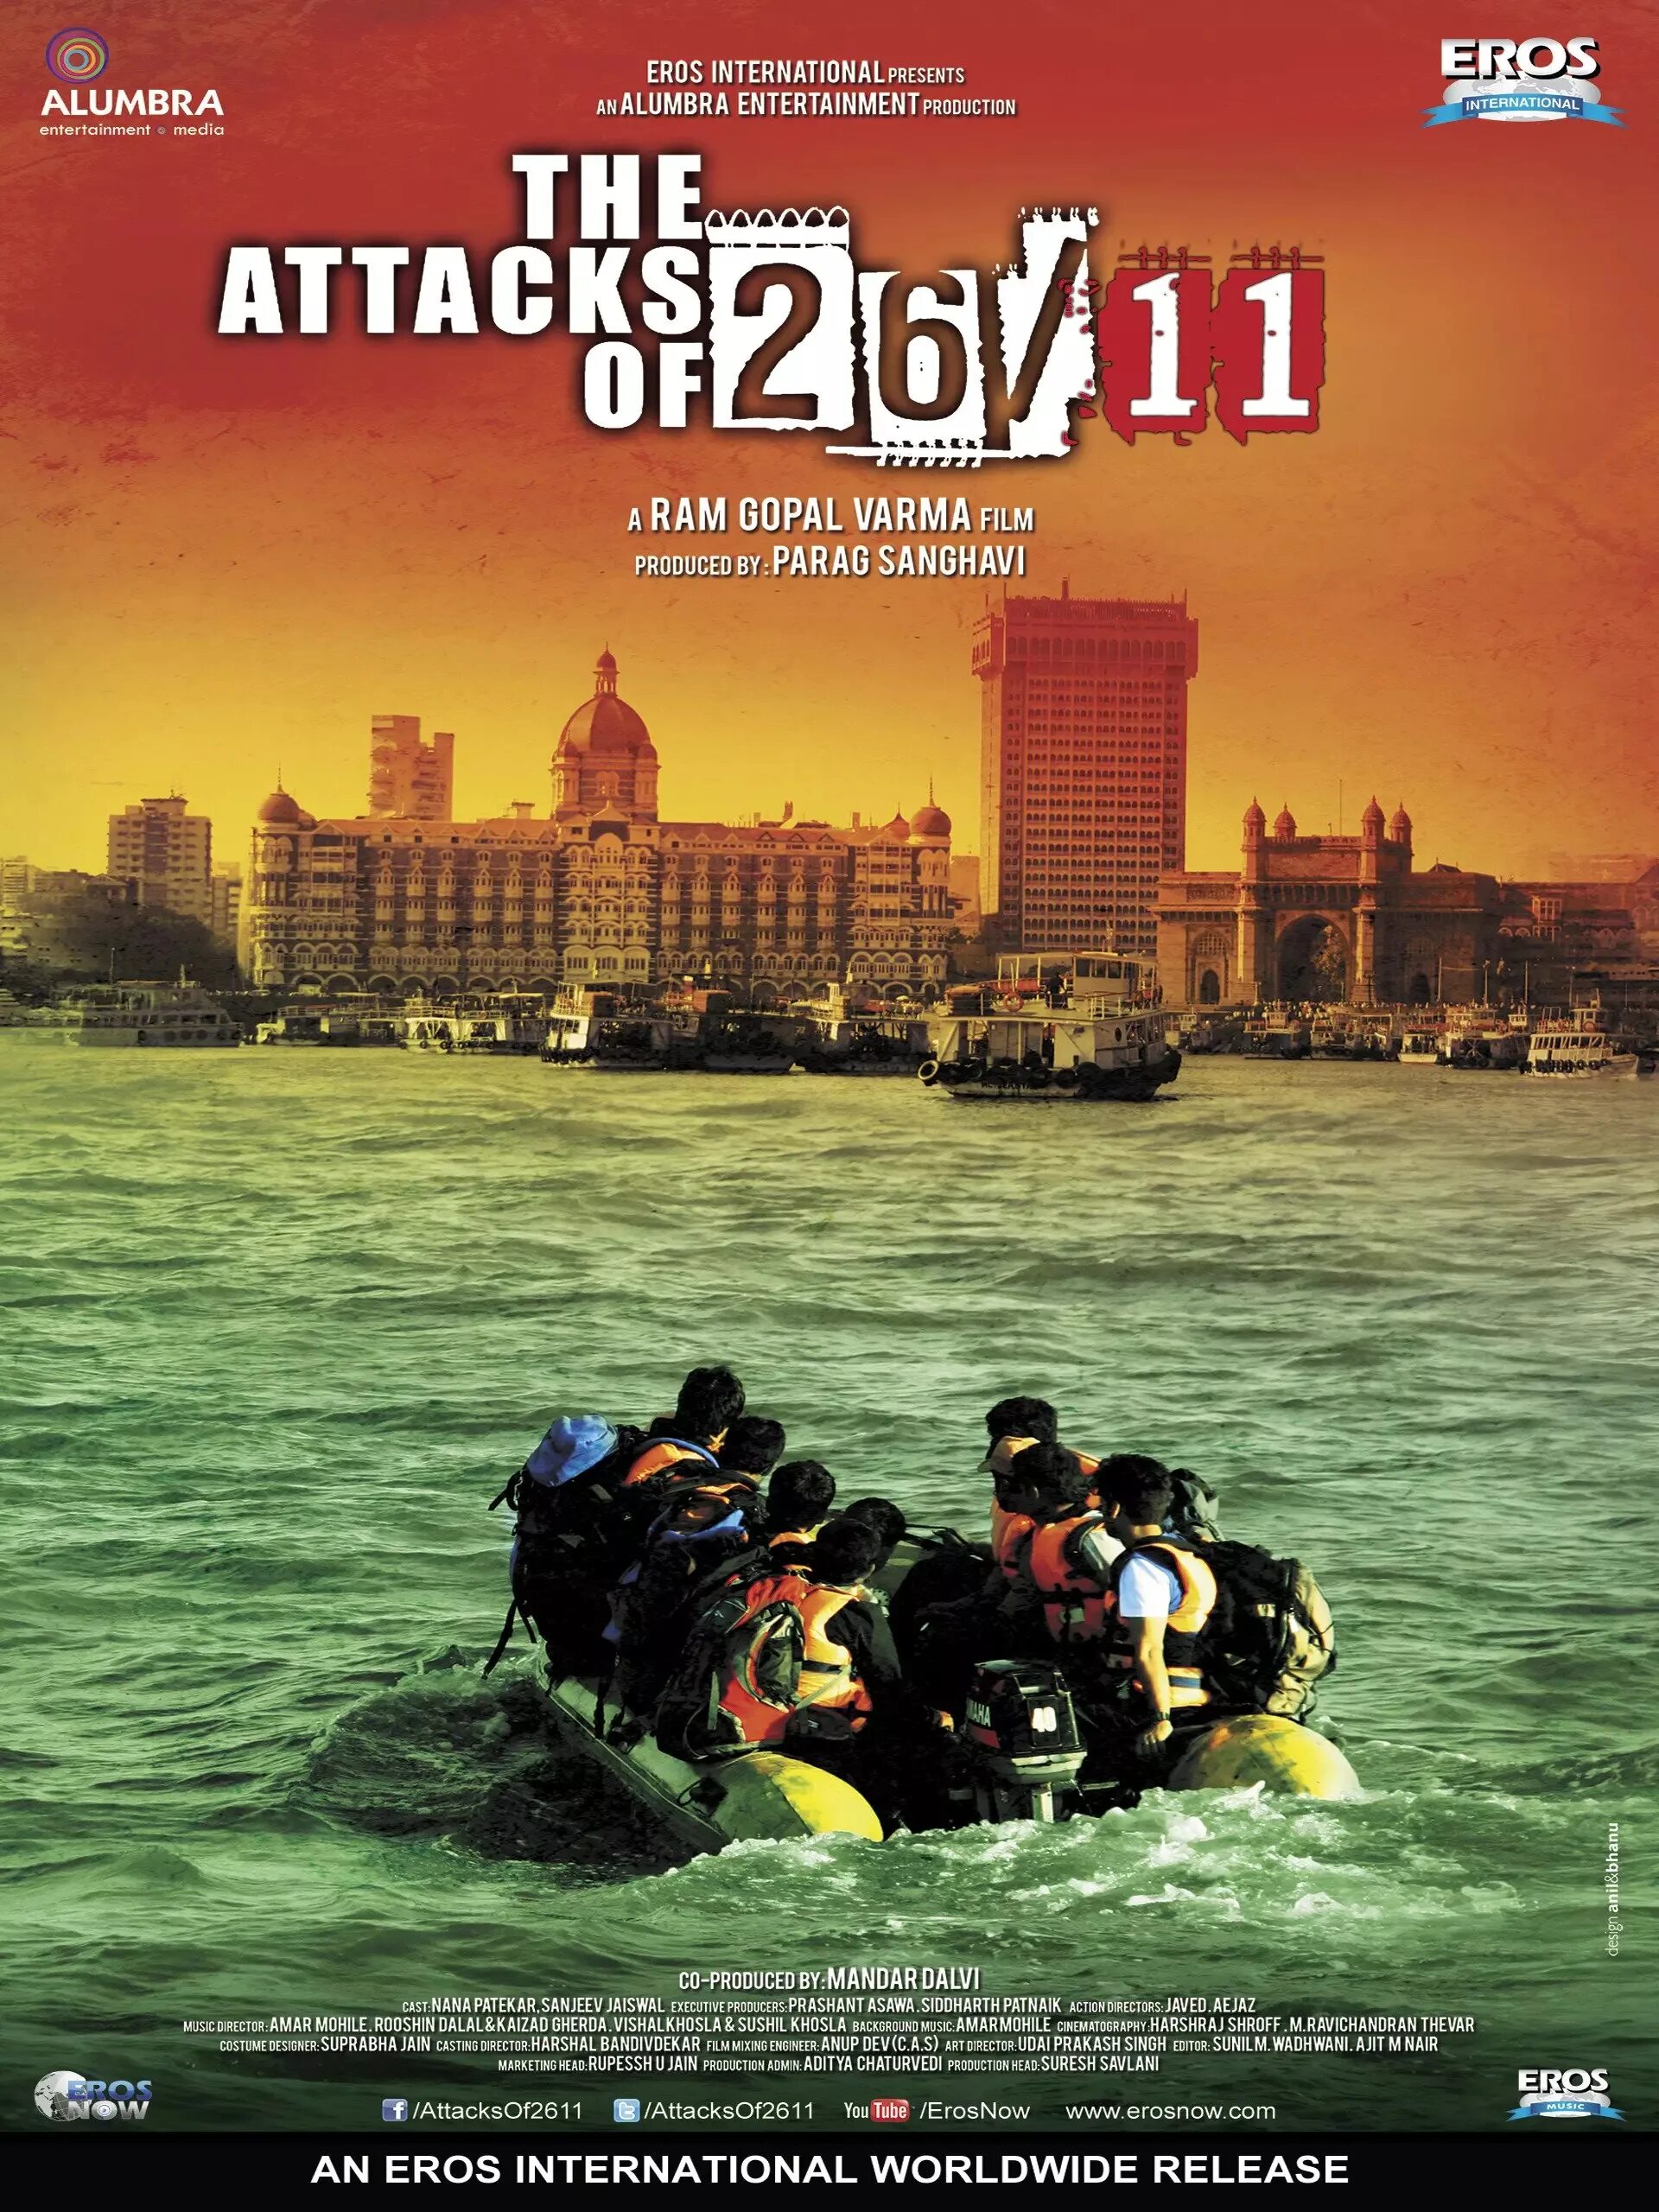 The Attacks of 26/11.